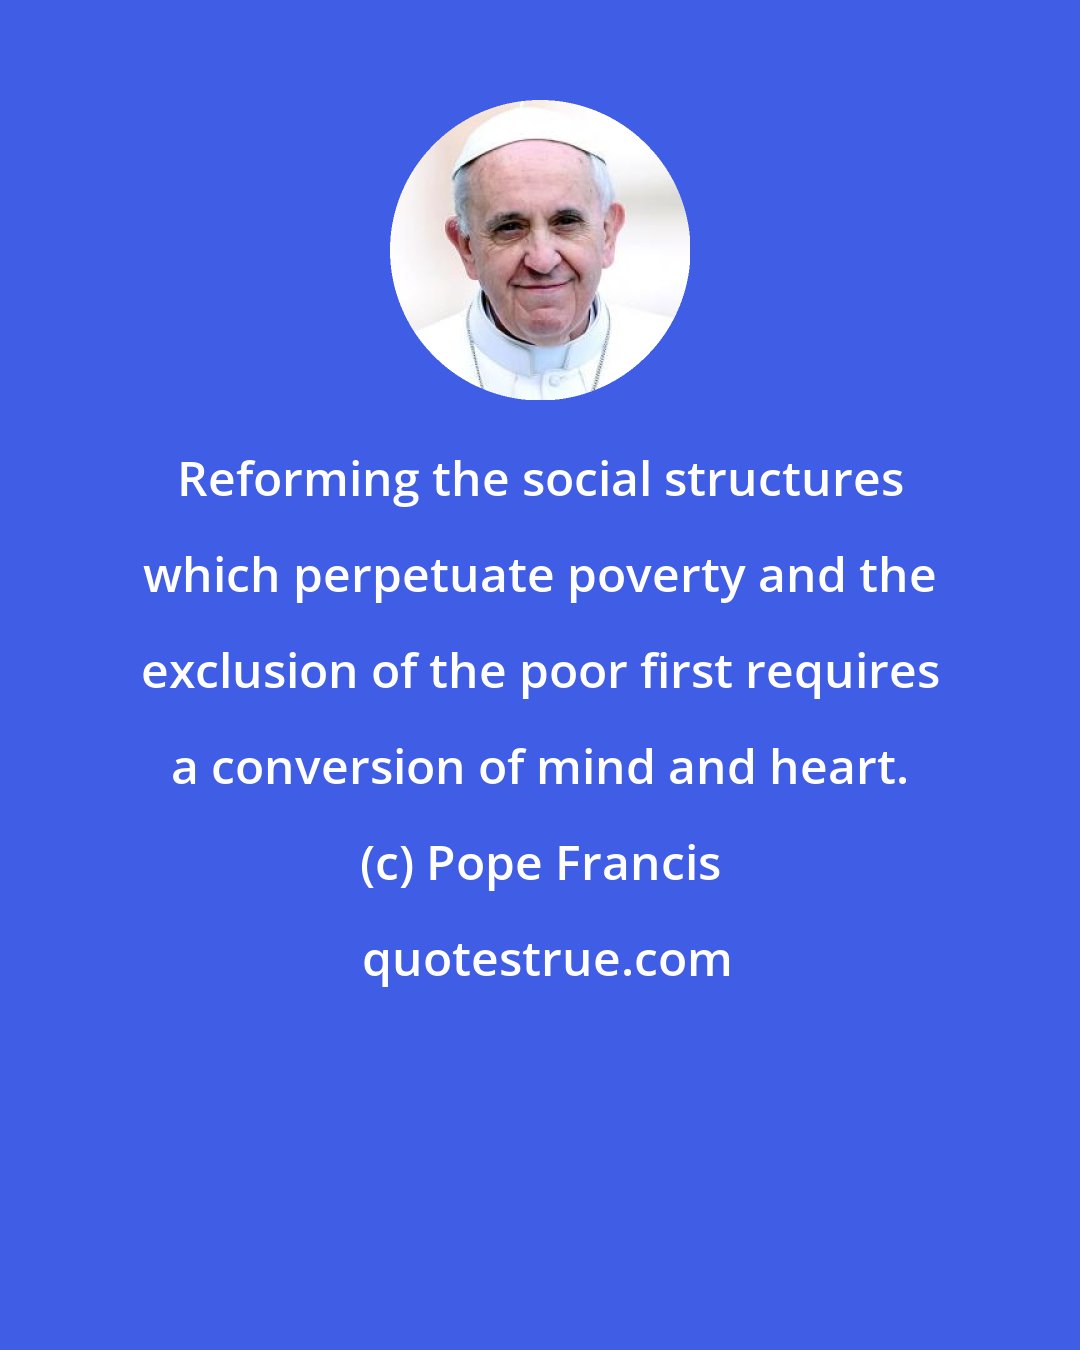 Pope Francis: Reforming the social structures which perpetuate poverty and the exclusion of the poor first requires a conversion of mind and heart.